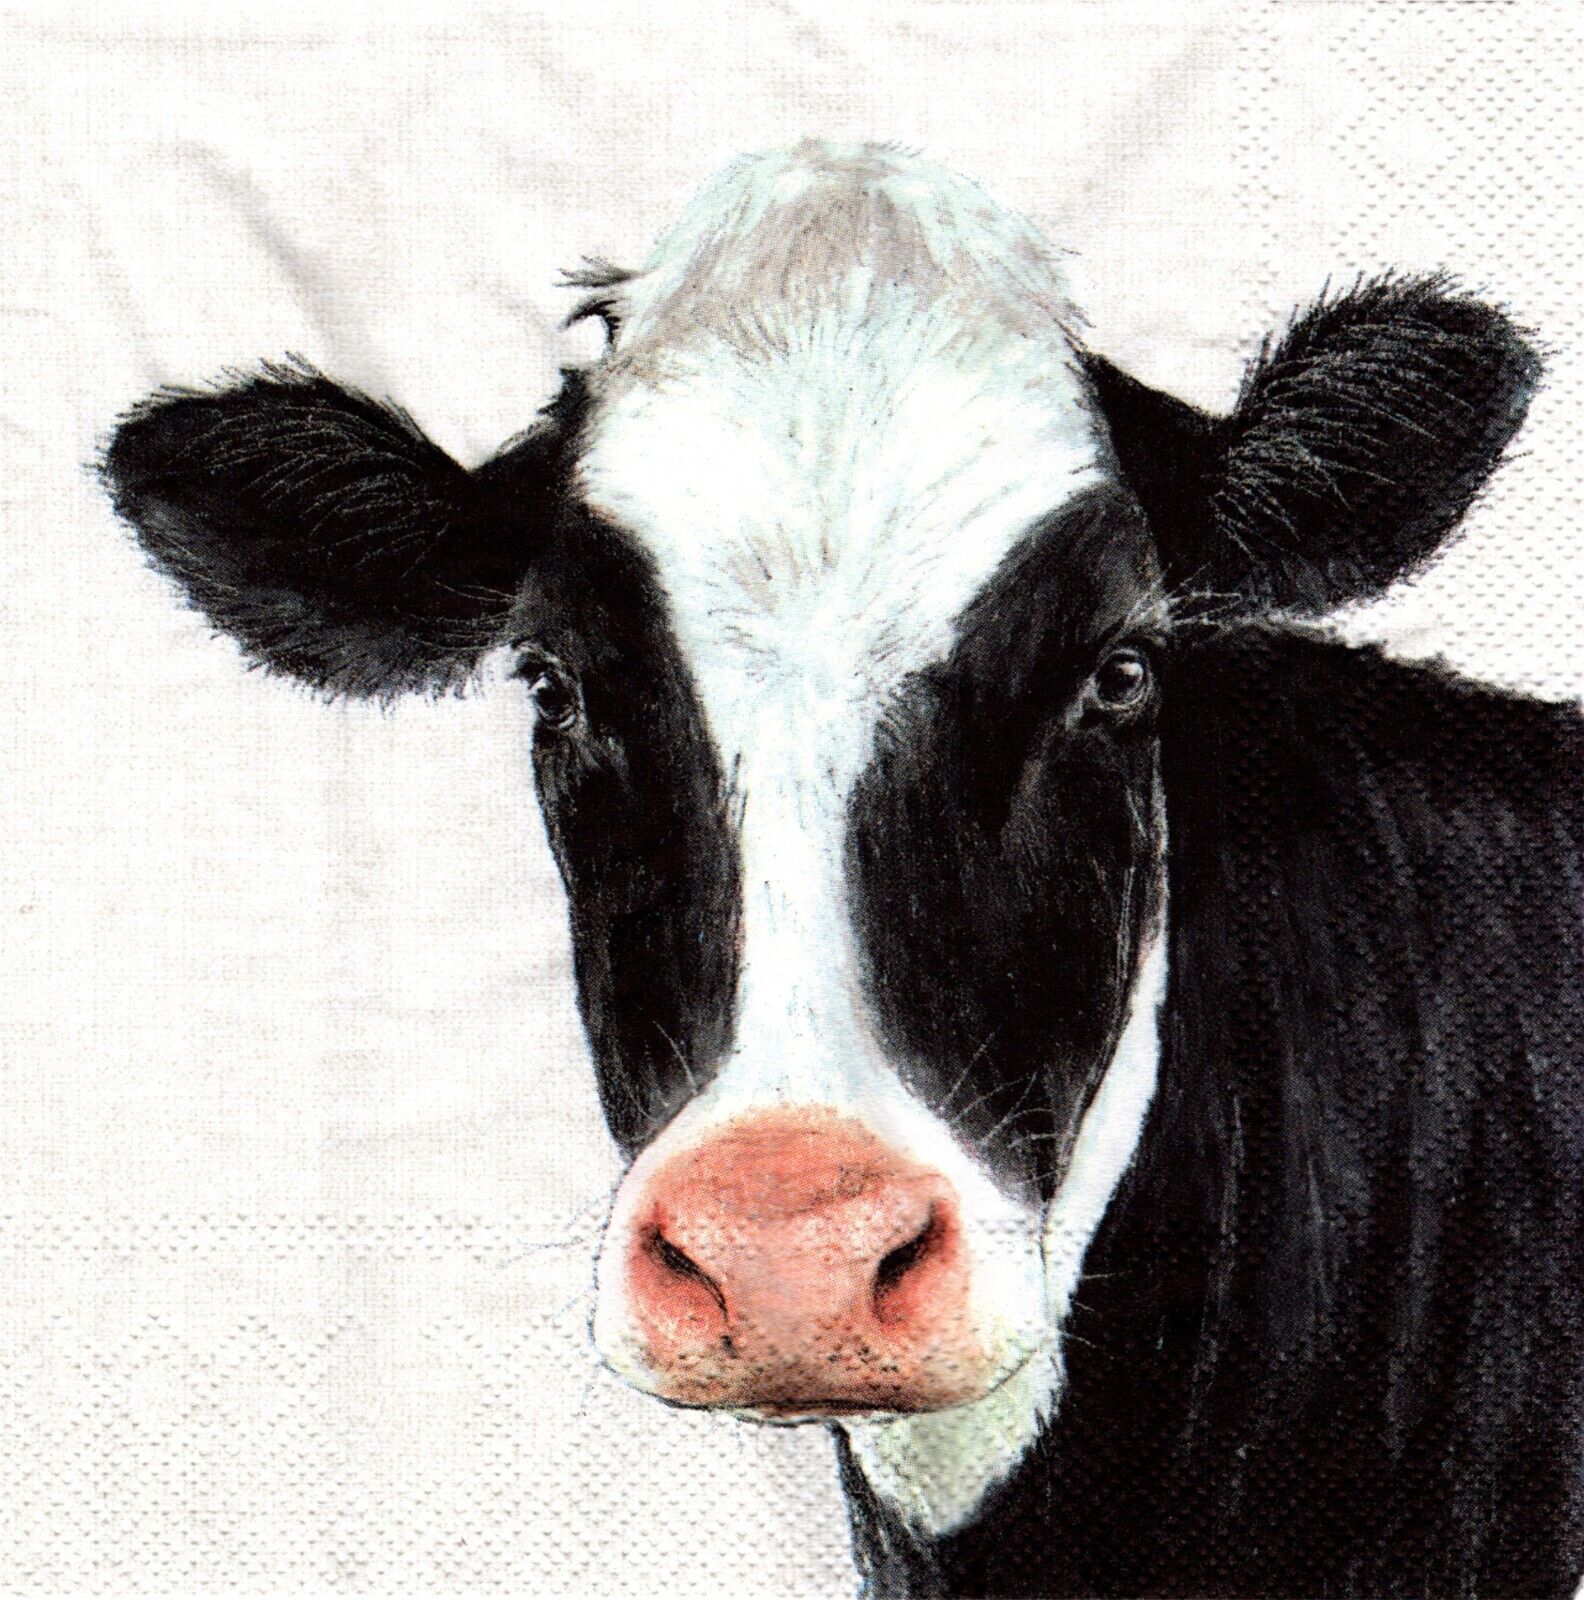 (2) Two Paper Lunch Napkins for Decoupage/Mixed Media - Single Cow farm animal